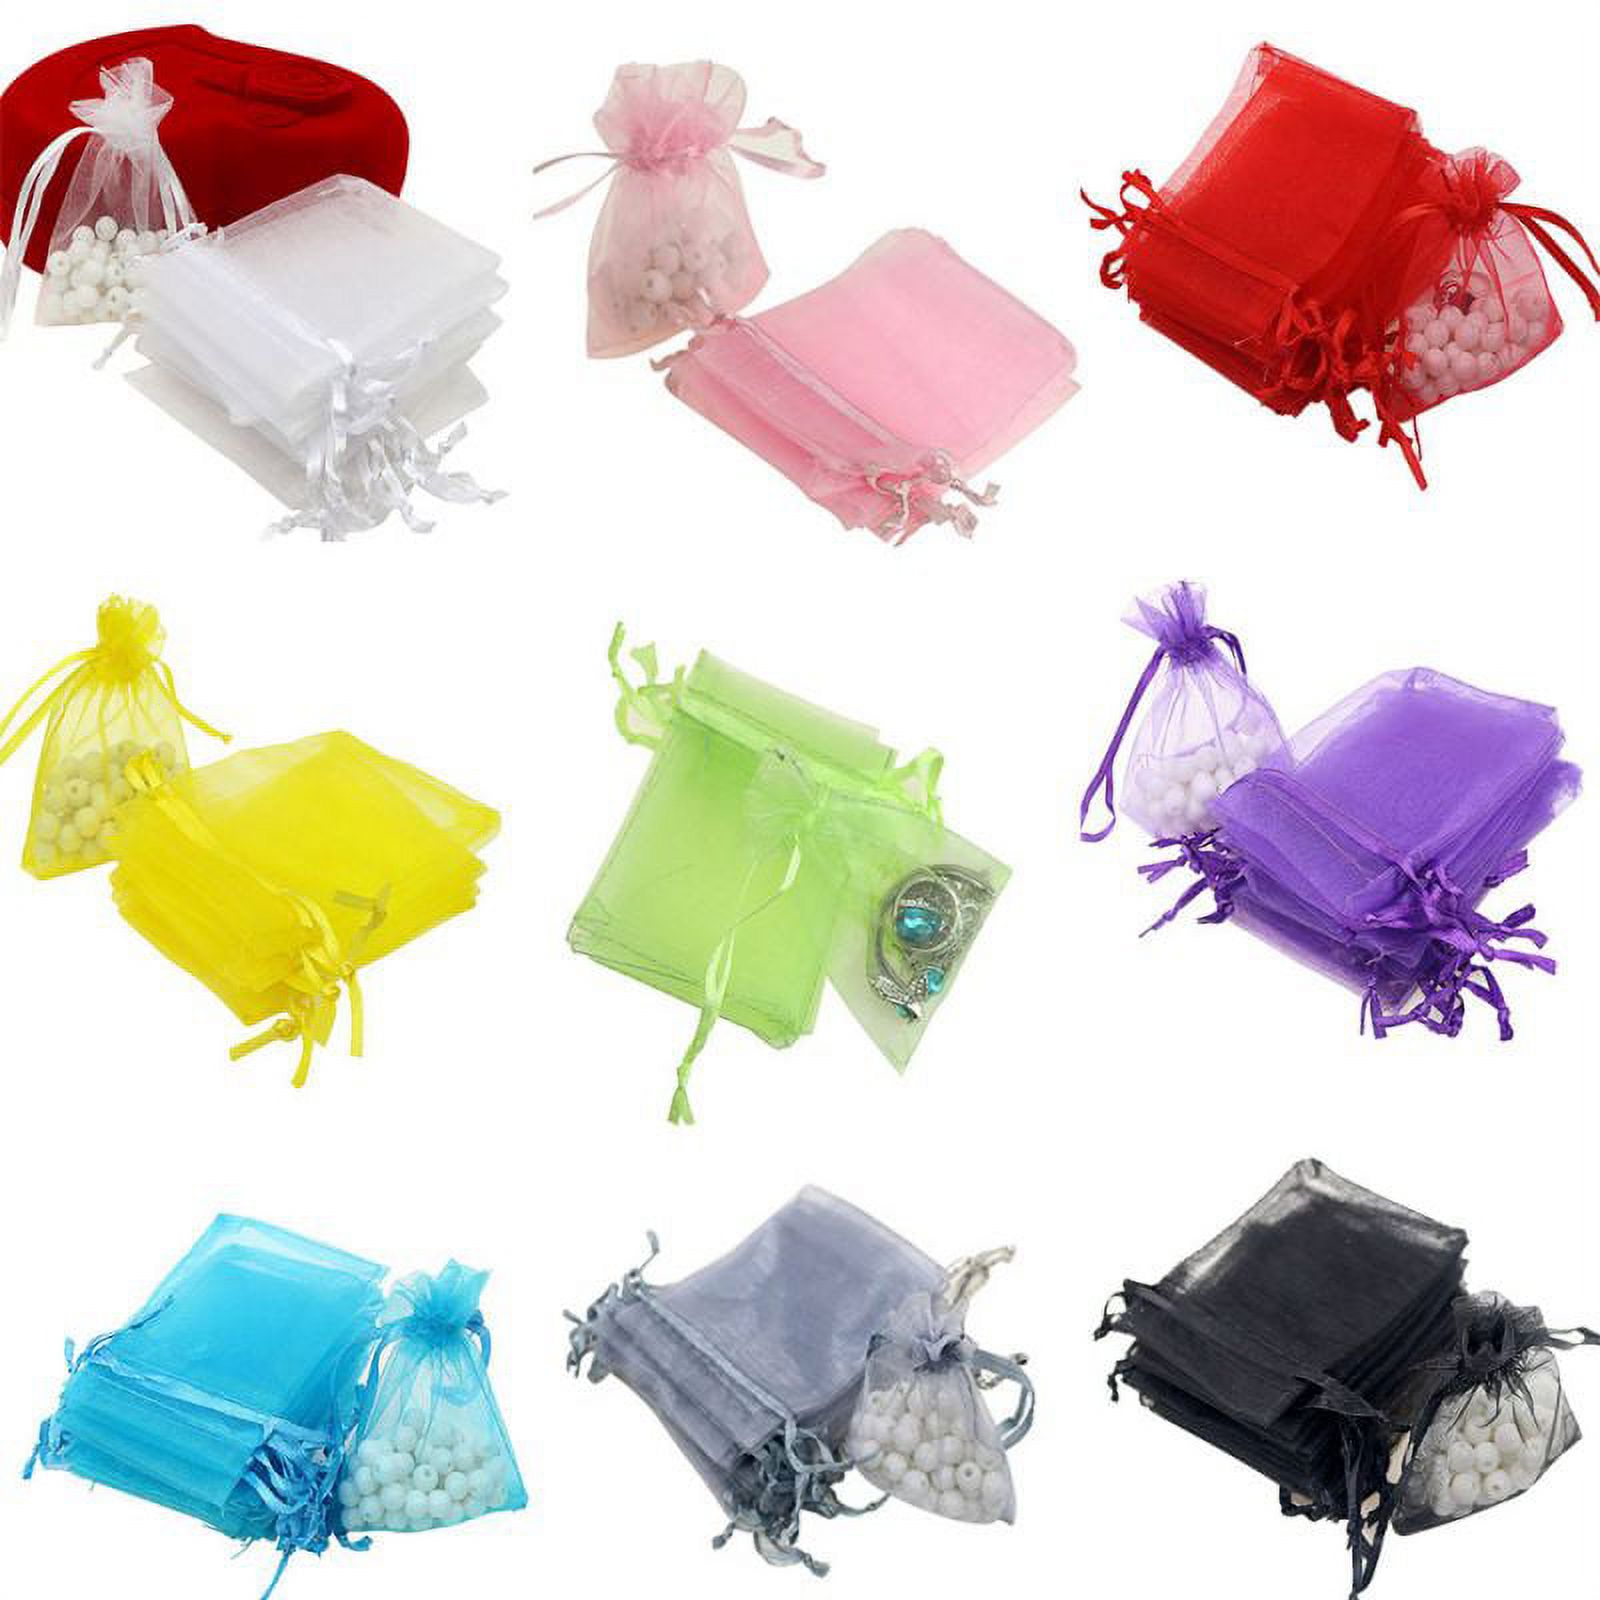 SUPERHOMUSE 100PCS Sheer Drawstring Organza Bags Jewelry Pouche Wedding Party Favor Gift Bag - image 1 of 8